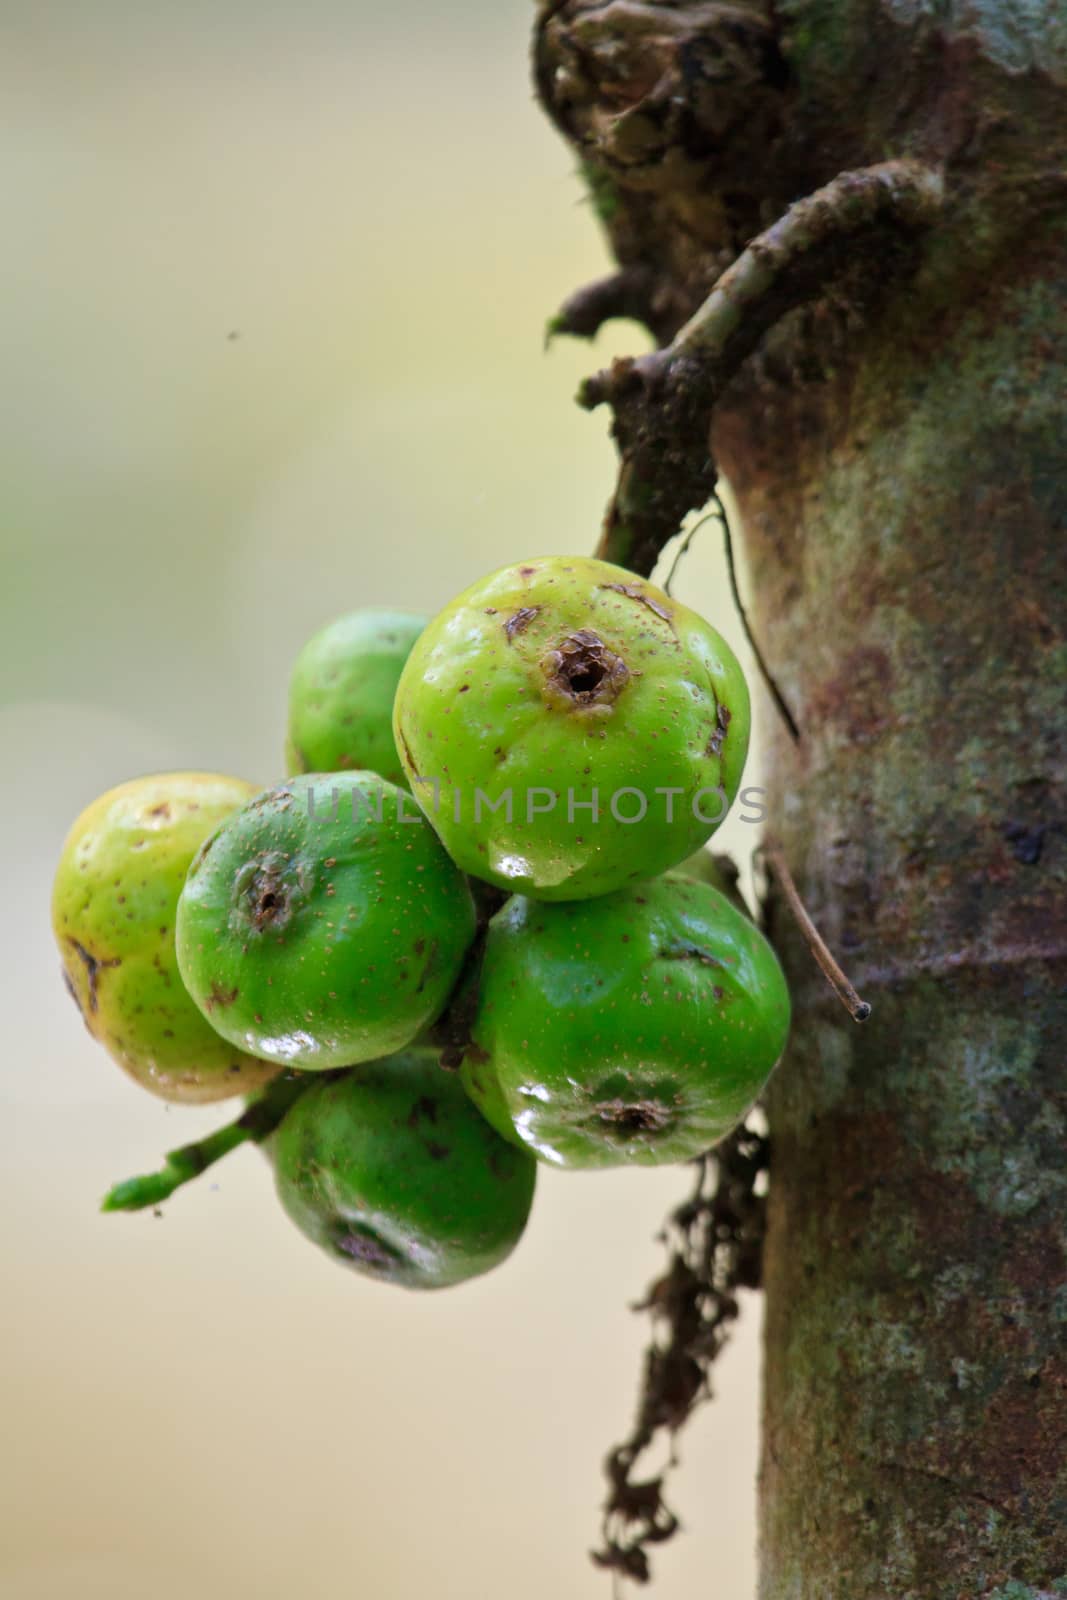 Fruits figs on the tree, Ficus carica